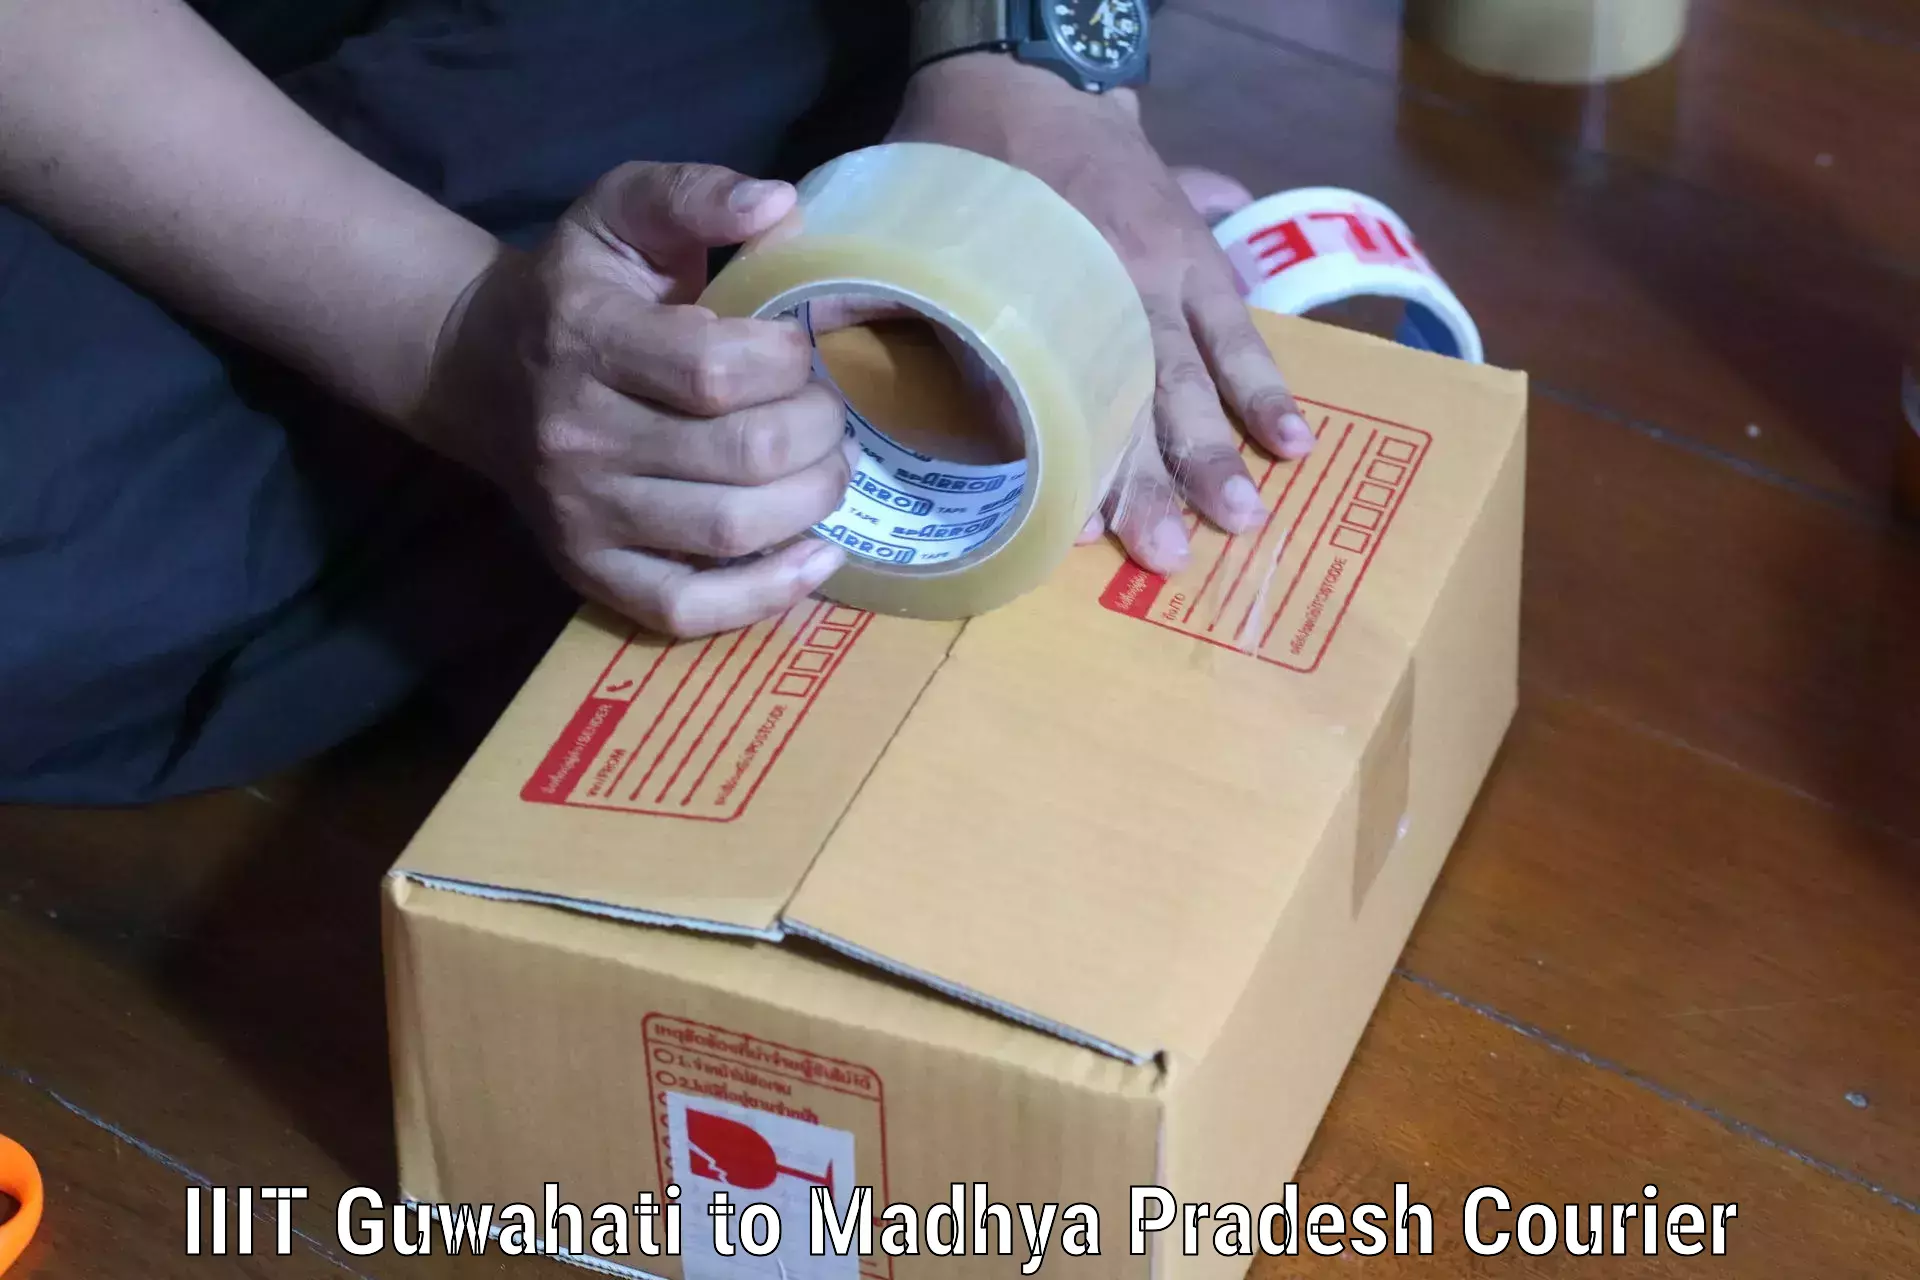 Round-the-clock parcel delivery IIIT Guwahati to Chandla